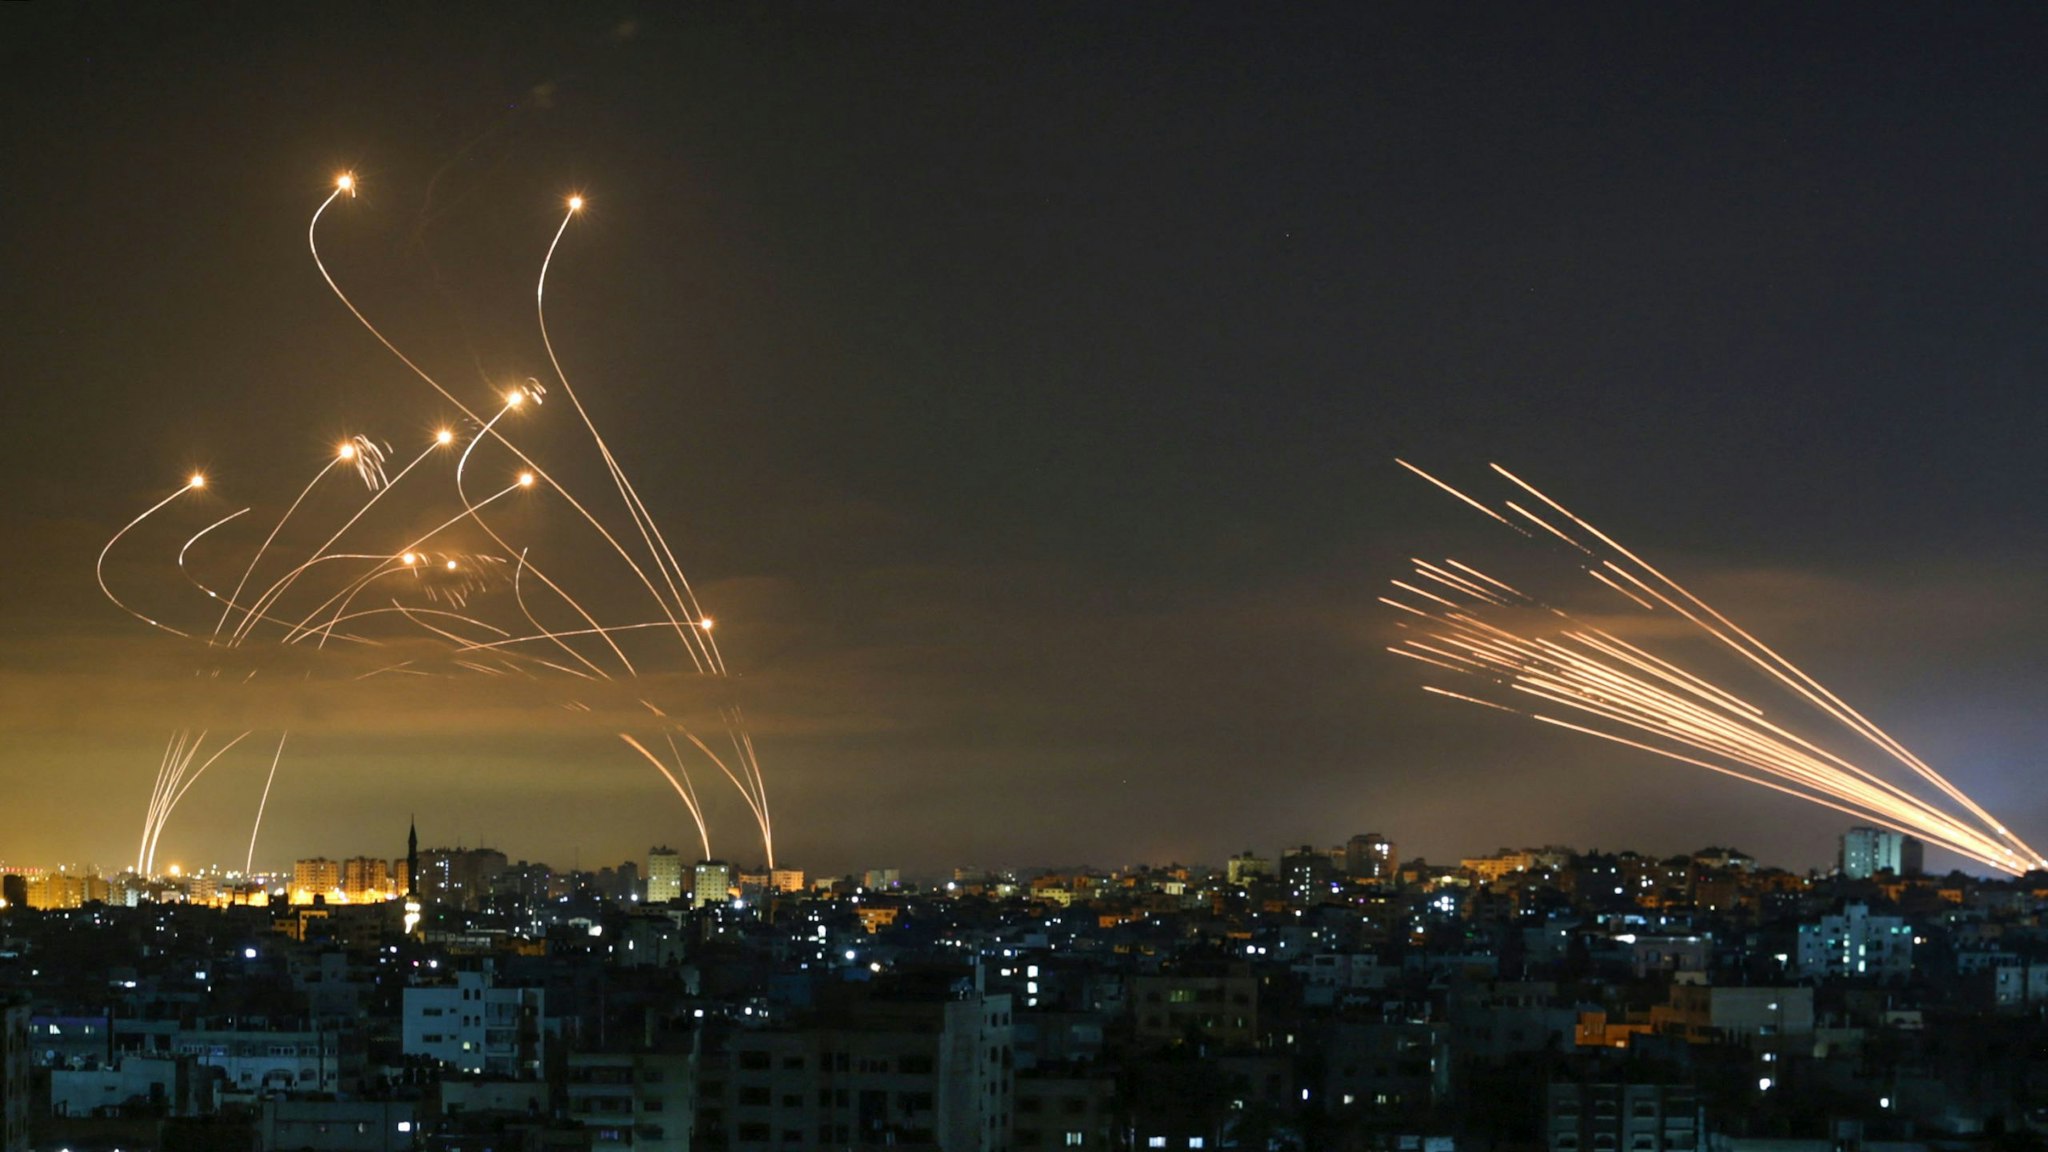 Rockets are seen in the night sky fired towards Israel from Beit Lahia in the northern Gaza Strip on May 14, 2021. - Israel bombarded Gaza with artillery and air strikes on Friday, May 14, in response to a new barrage of rocket fire from the Hamas-run enclave, but stopped short of a ground offensive in the conflict that has now claimed more than 100 Palestinian lives. As the violence intensified, Israel said it was carrying out an attack "in the Gaza Strip" although it later clarified there were no boots on the ground.